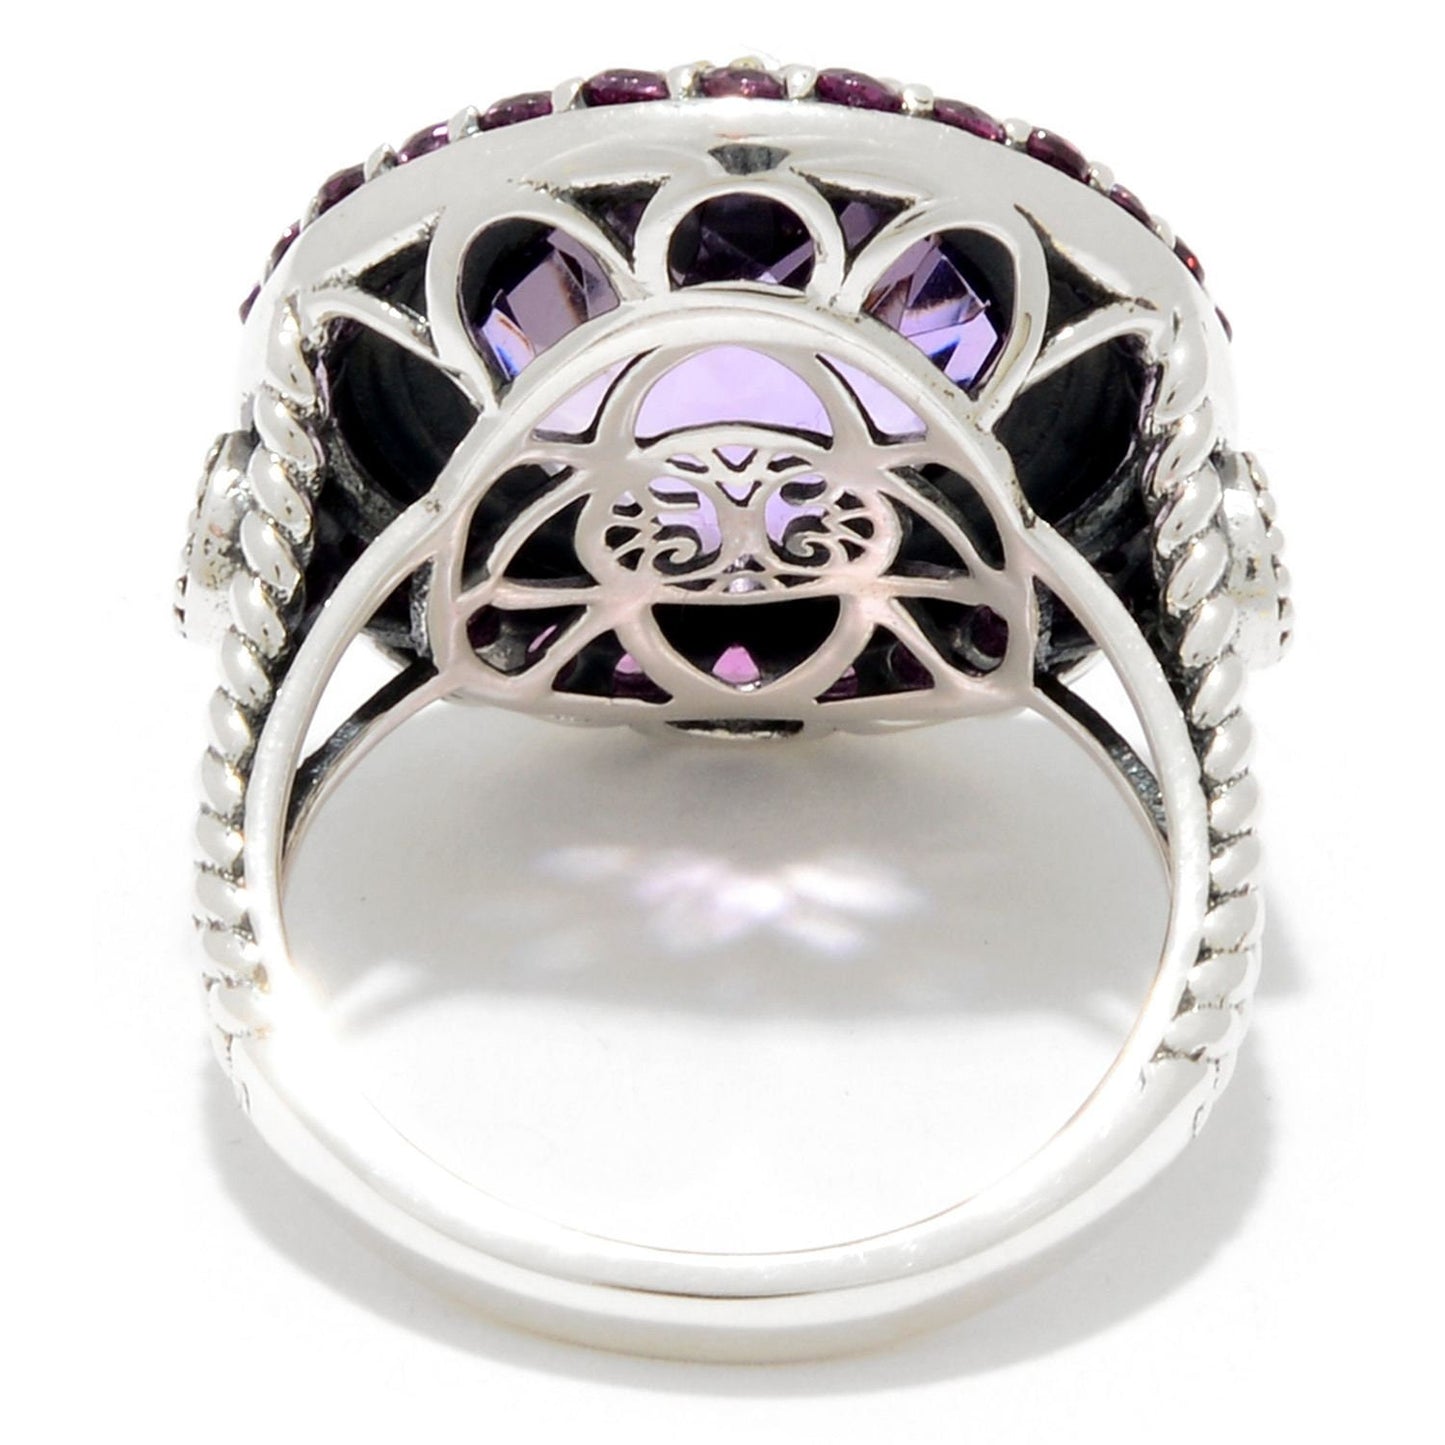 Natural Pink Amethyst With Rhodolite Gemstone Ring, 925 Sterling Silver Ring, Engagement Ring, Ring For Women's, Two Tone Ring, Gift For Her